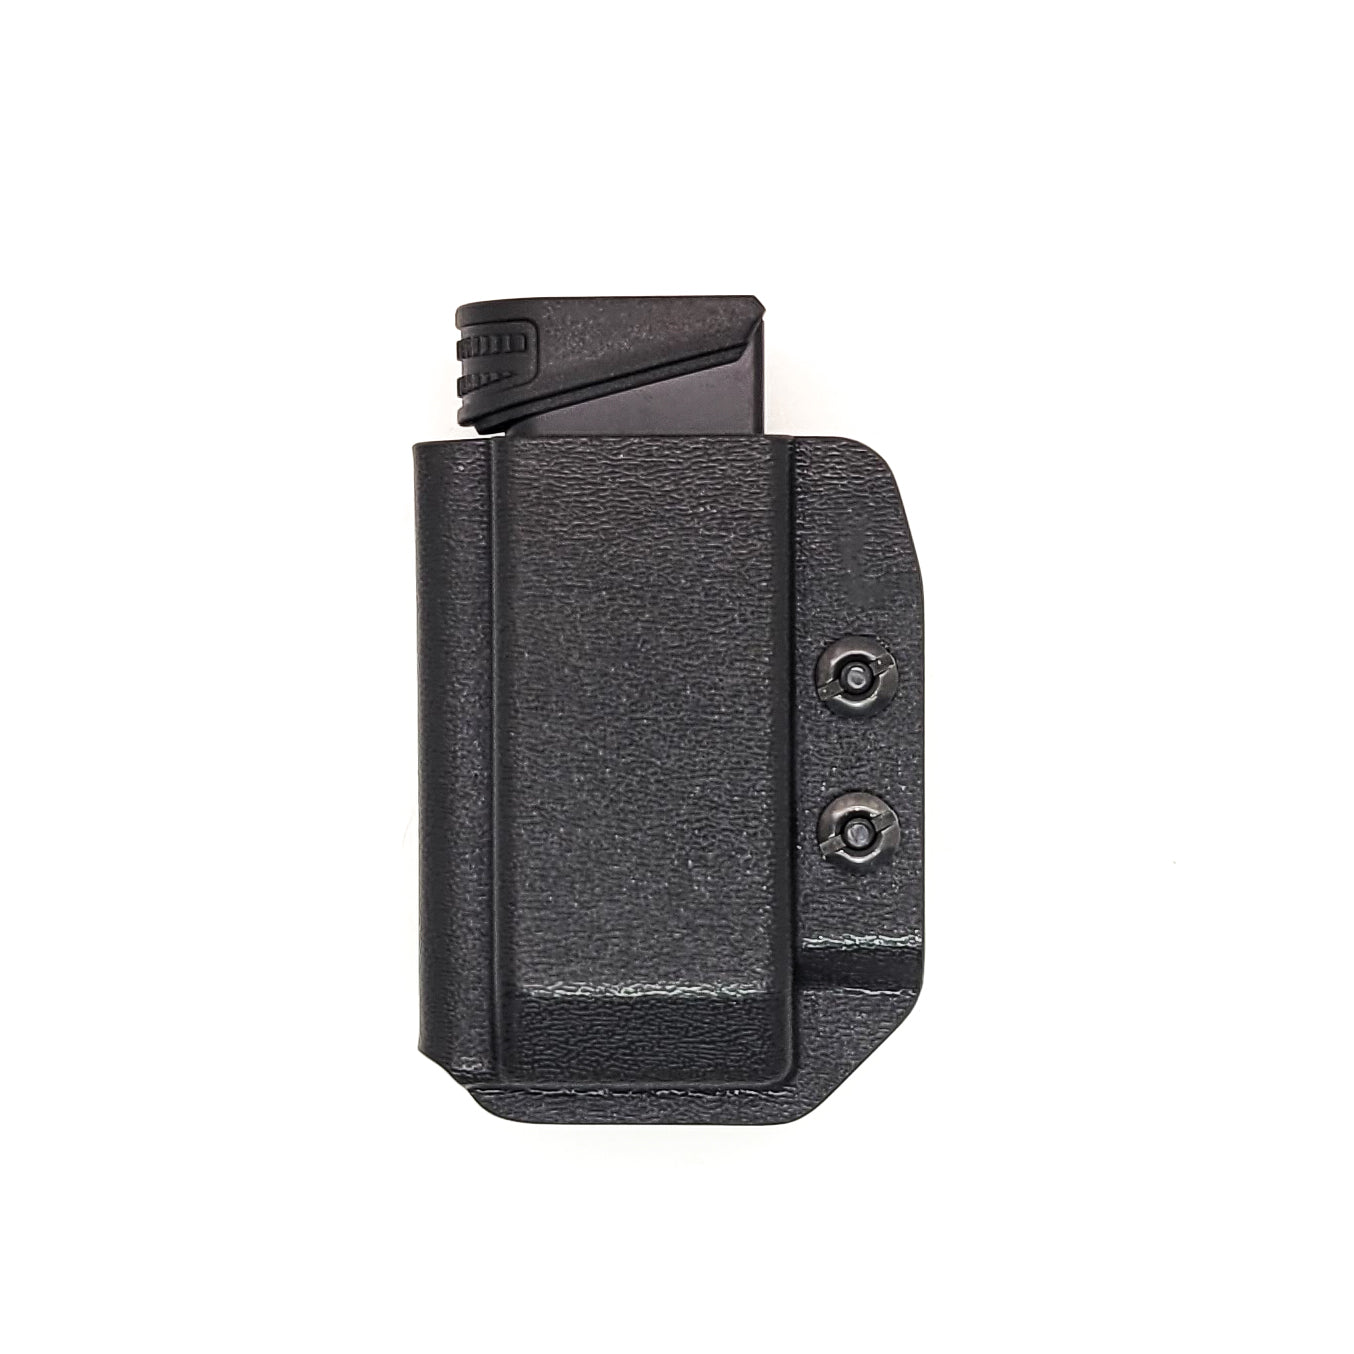 For the Best, most comfortable, Kydex IWB AIWB appendix inside waistband magazine pouch for FN Reflex, shop Four Brothers Holsters. Suitable for belt widths of 1 1/2" & 1 3/4". Adjustable retention. Appendix Carry Carrier Holster Hellcat Pro, Sig P365XL, Glock 43X & 48, Smith and Wesson Equalizer, and Shield Plus 9mm.